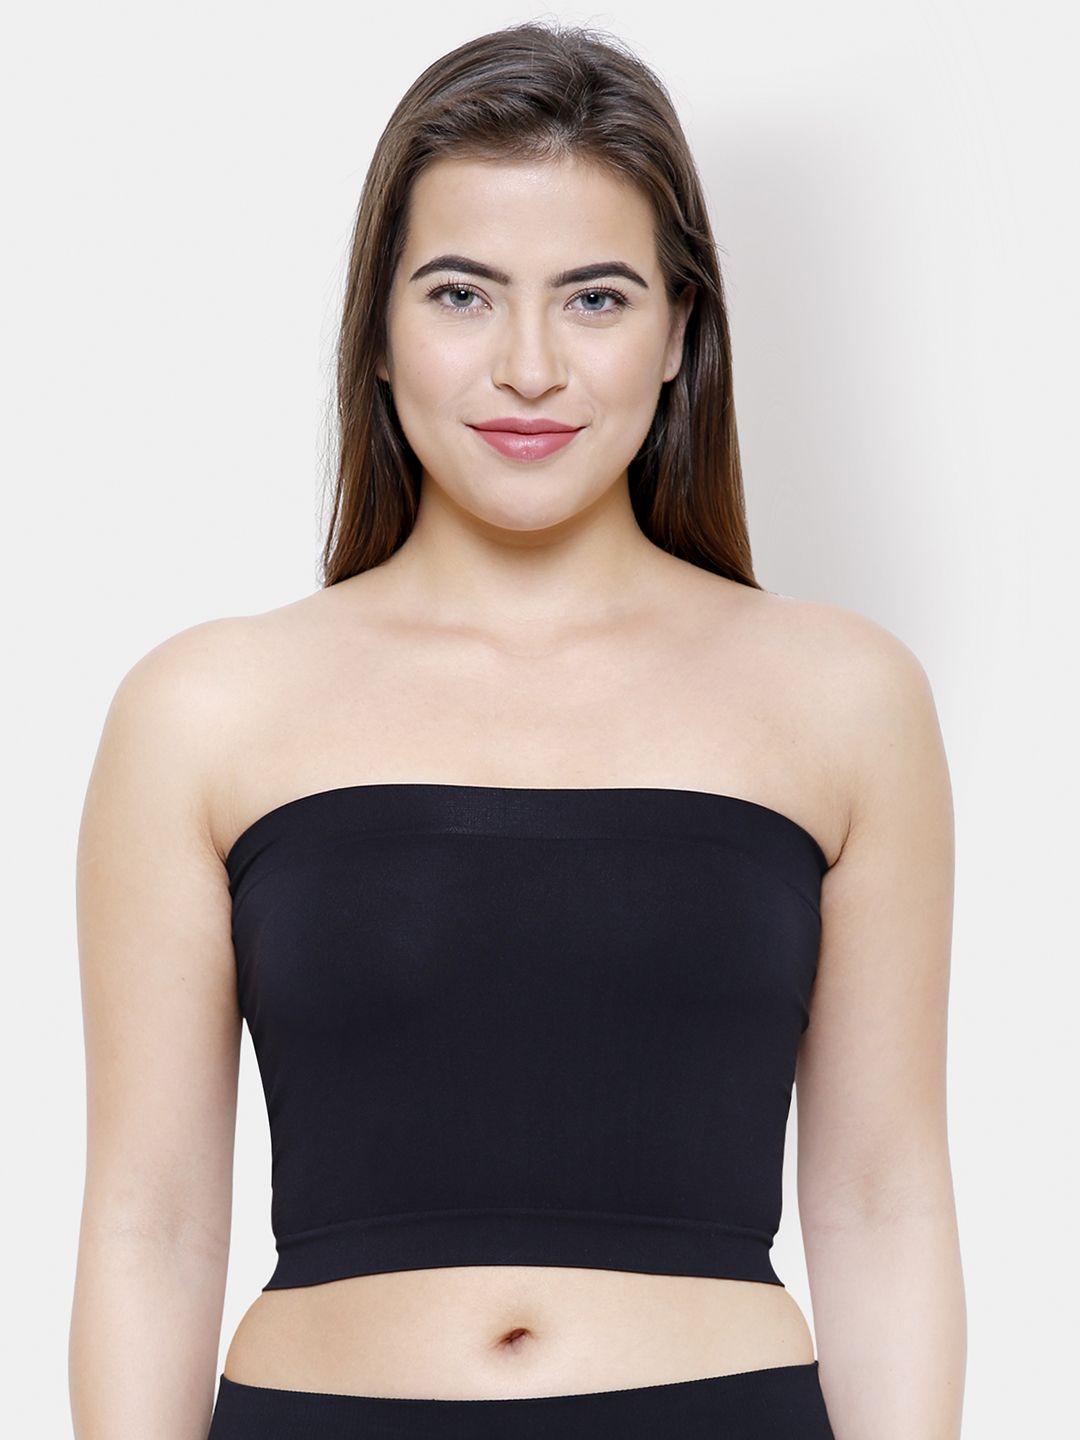 fashionrack-women-black-solid-strapless-cropped-camisole-4018